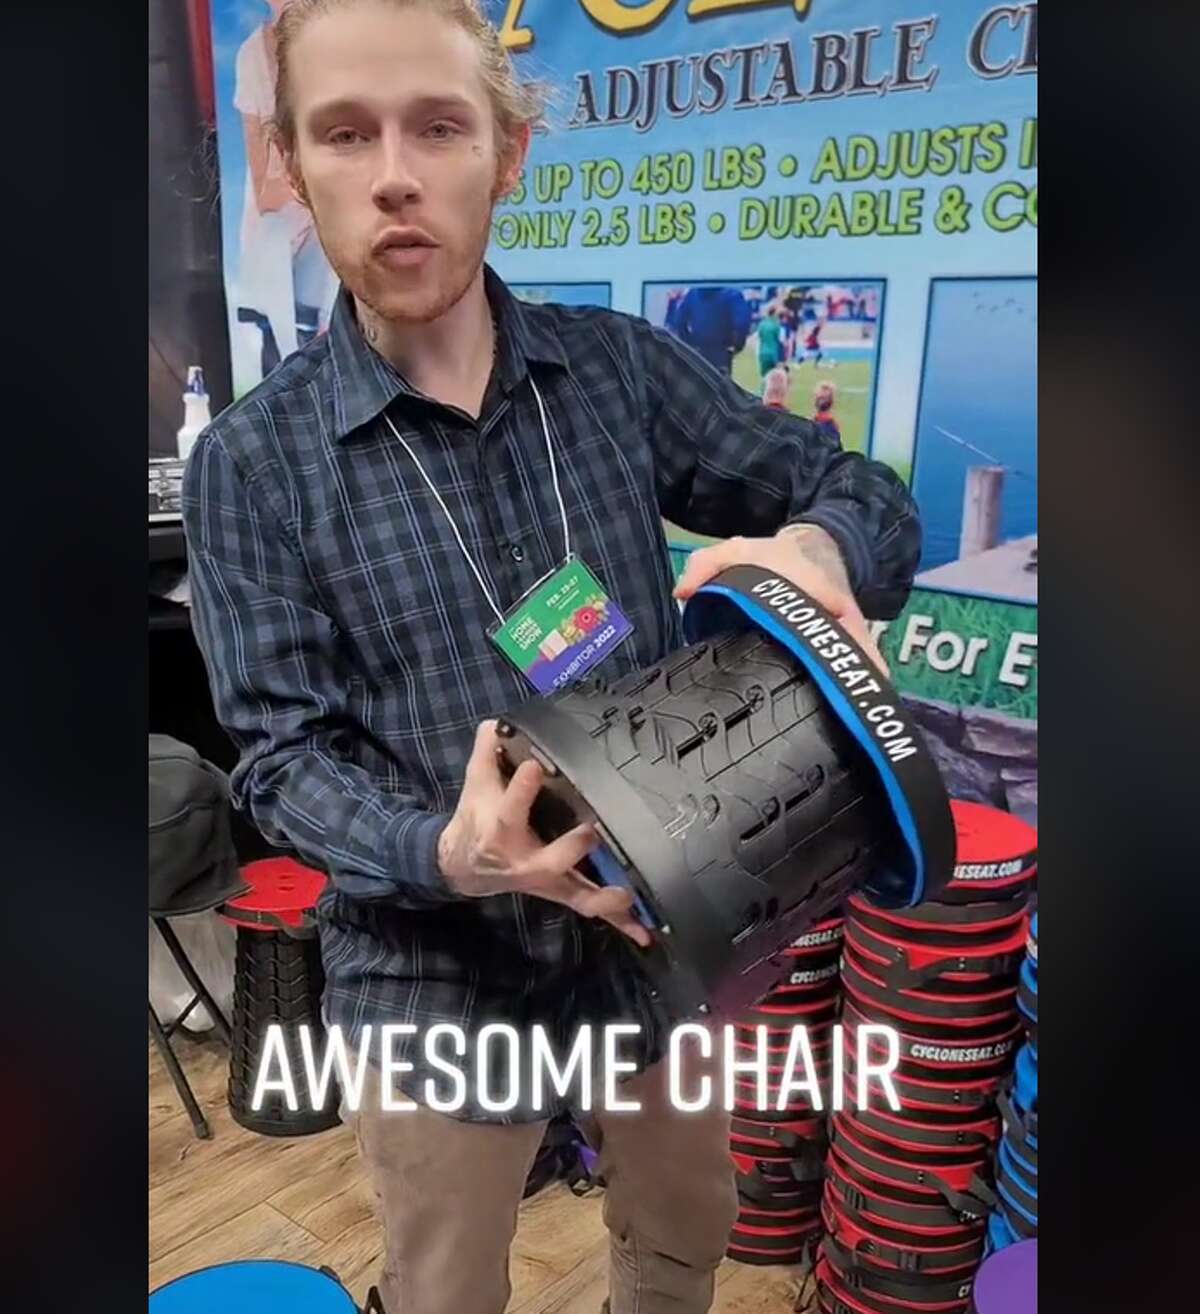 A product displayed at the San Antonio Home and Garden Show went viral on TikTok over the weekend.